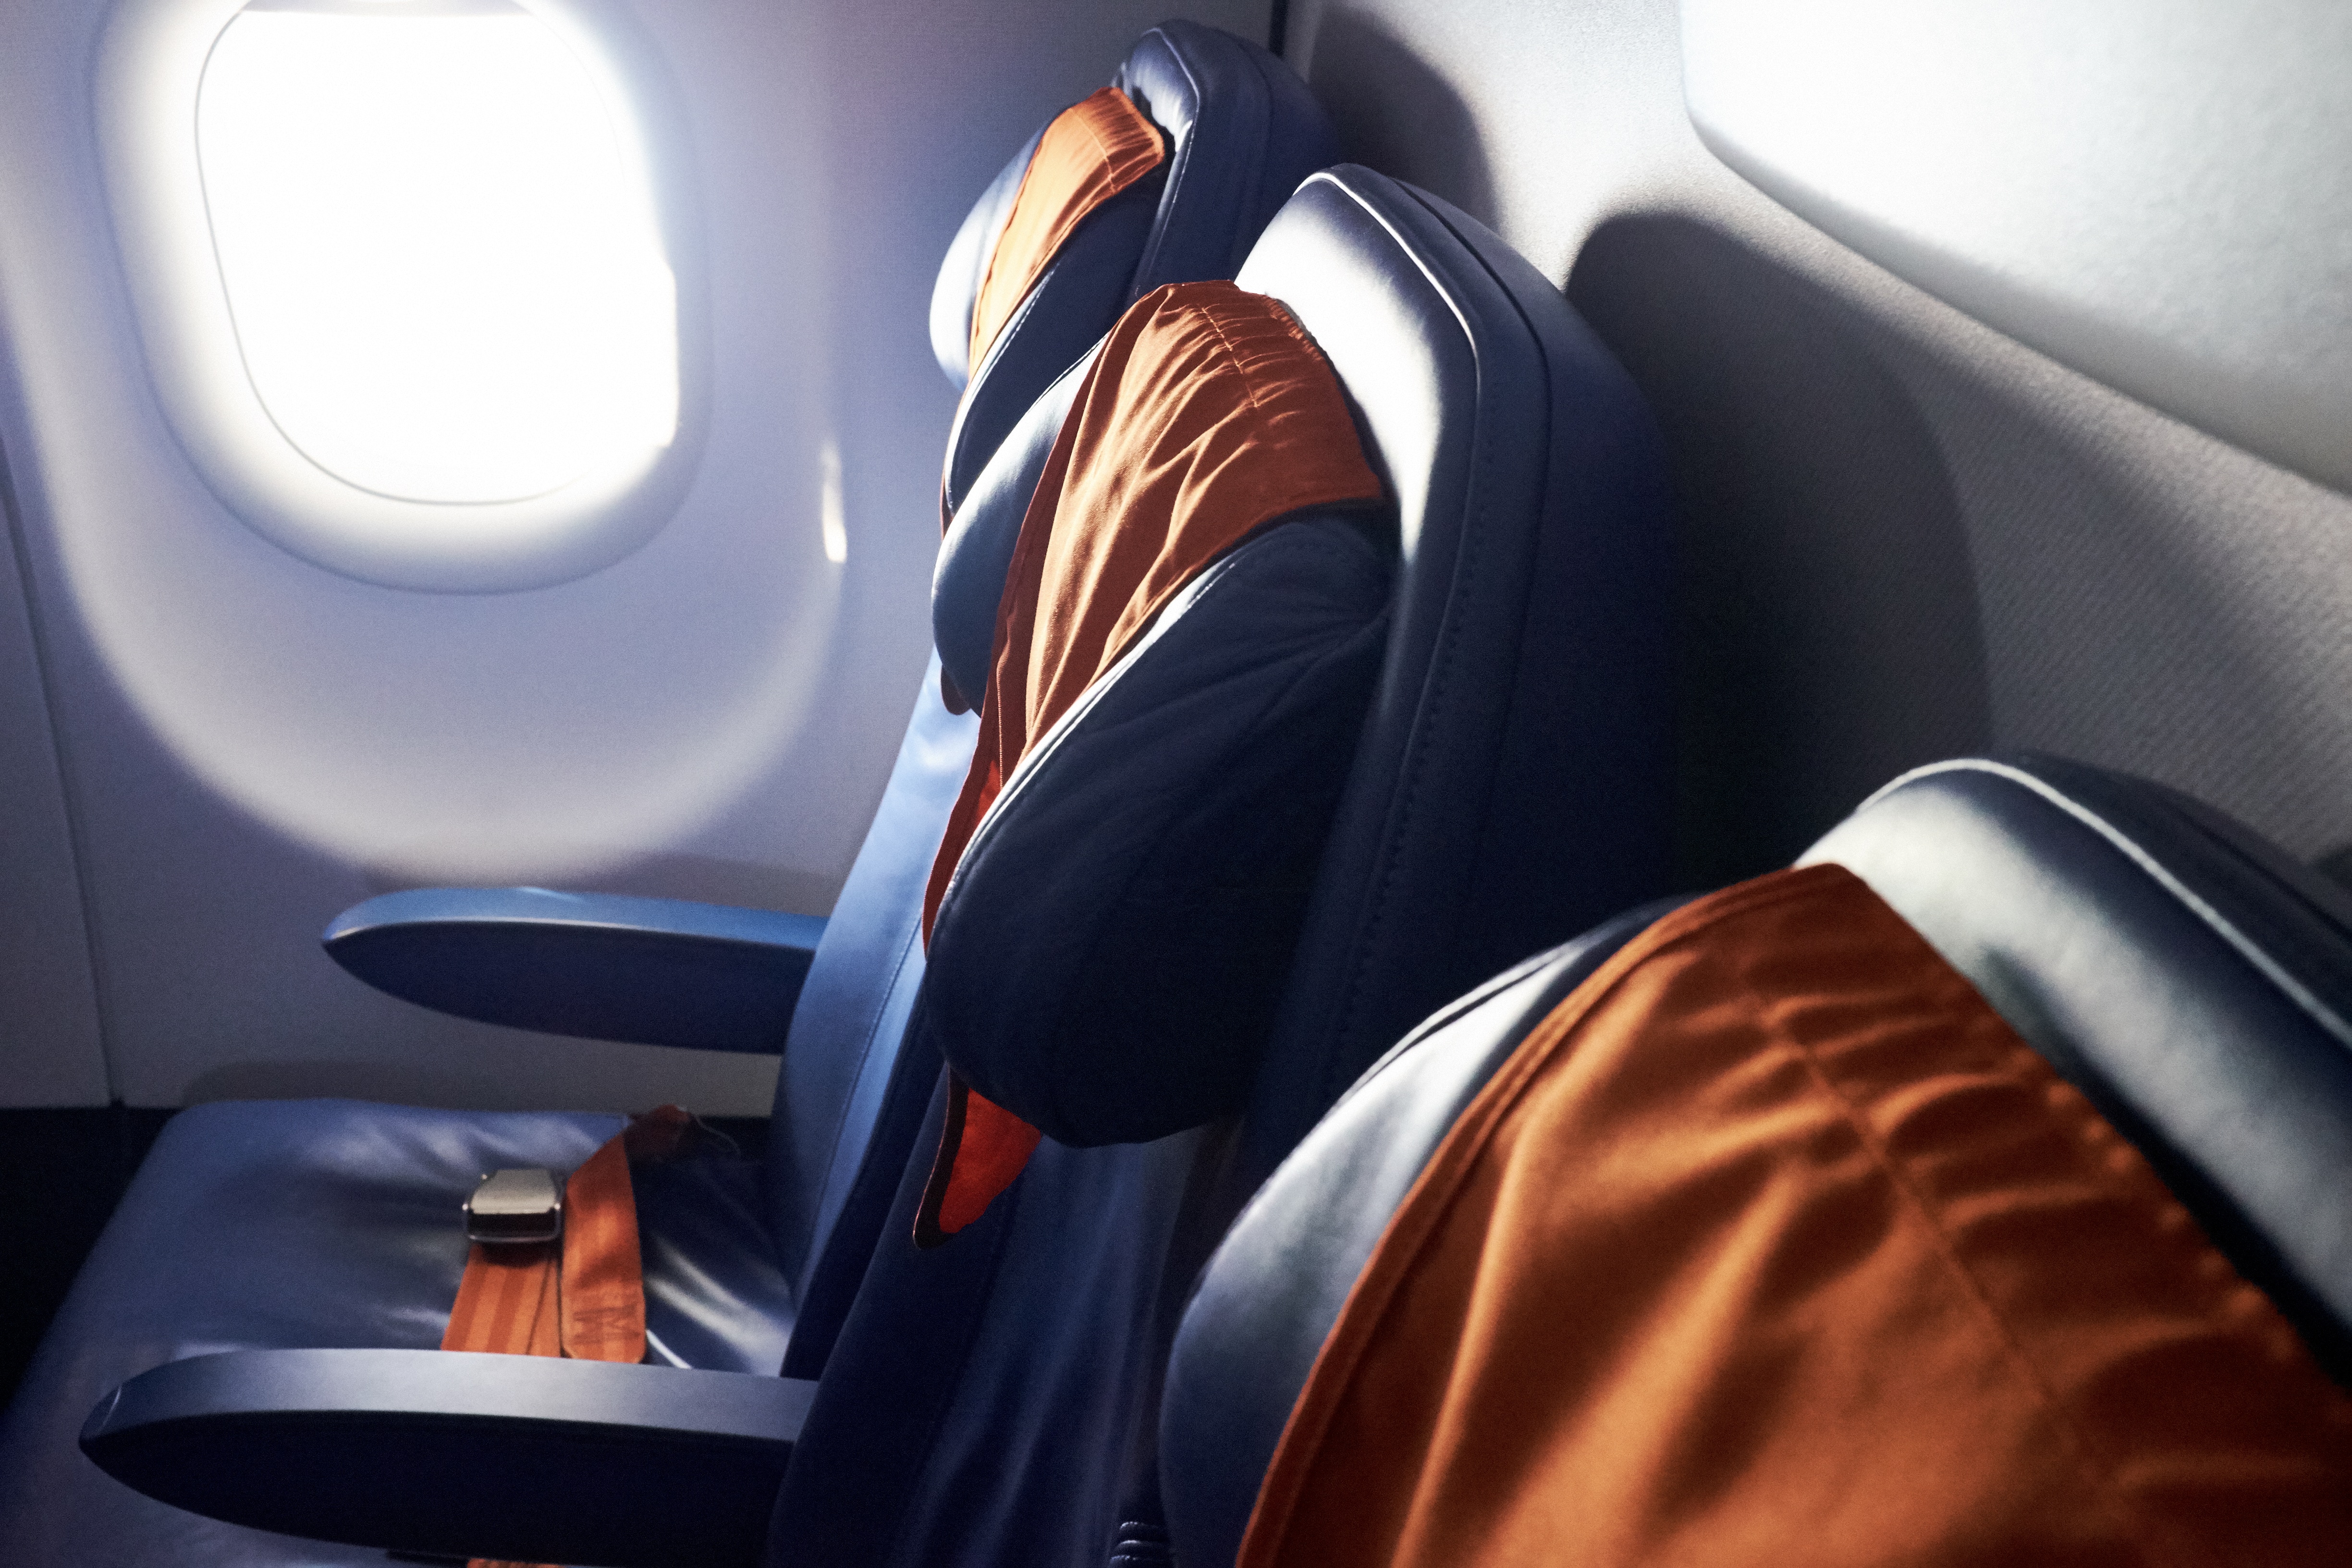 JetBlue To Launch Basic Economy Fares In 2019